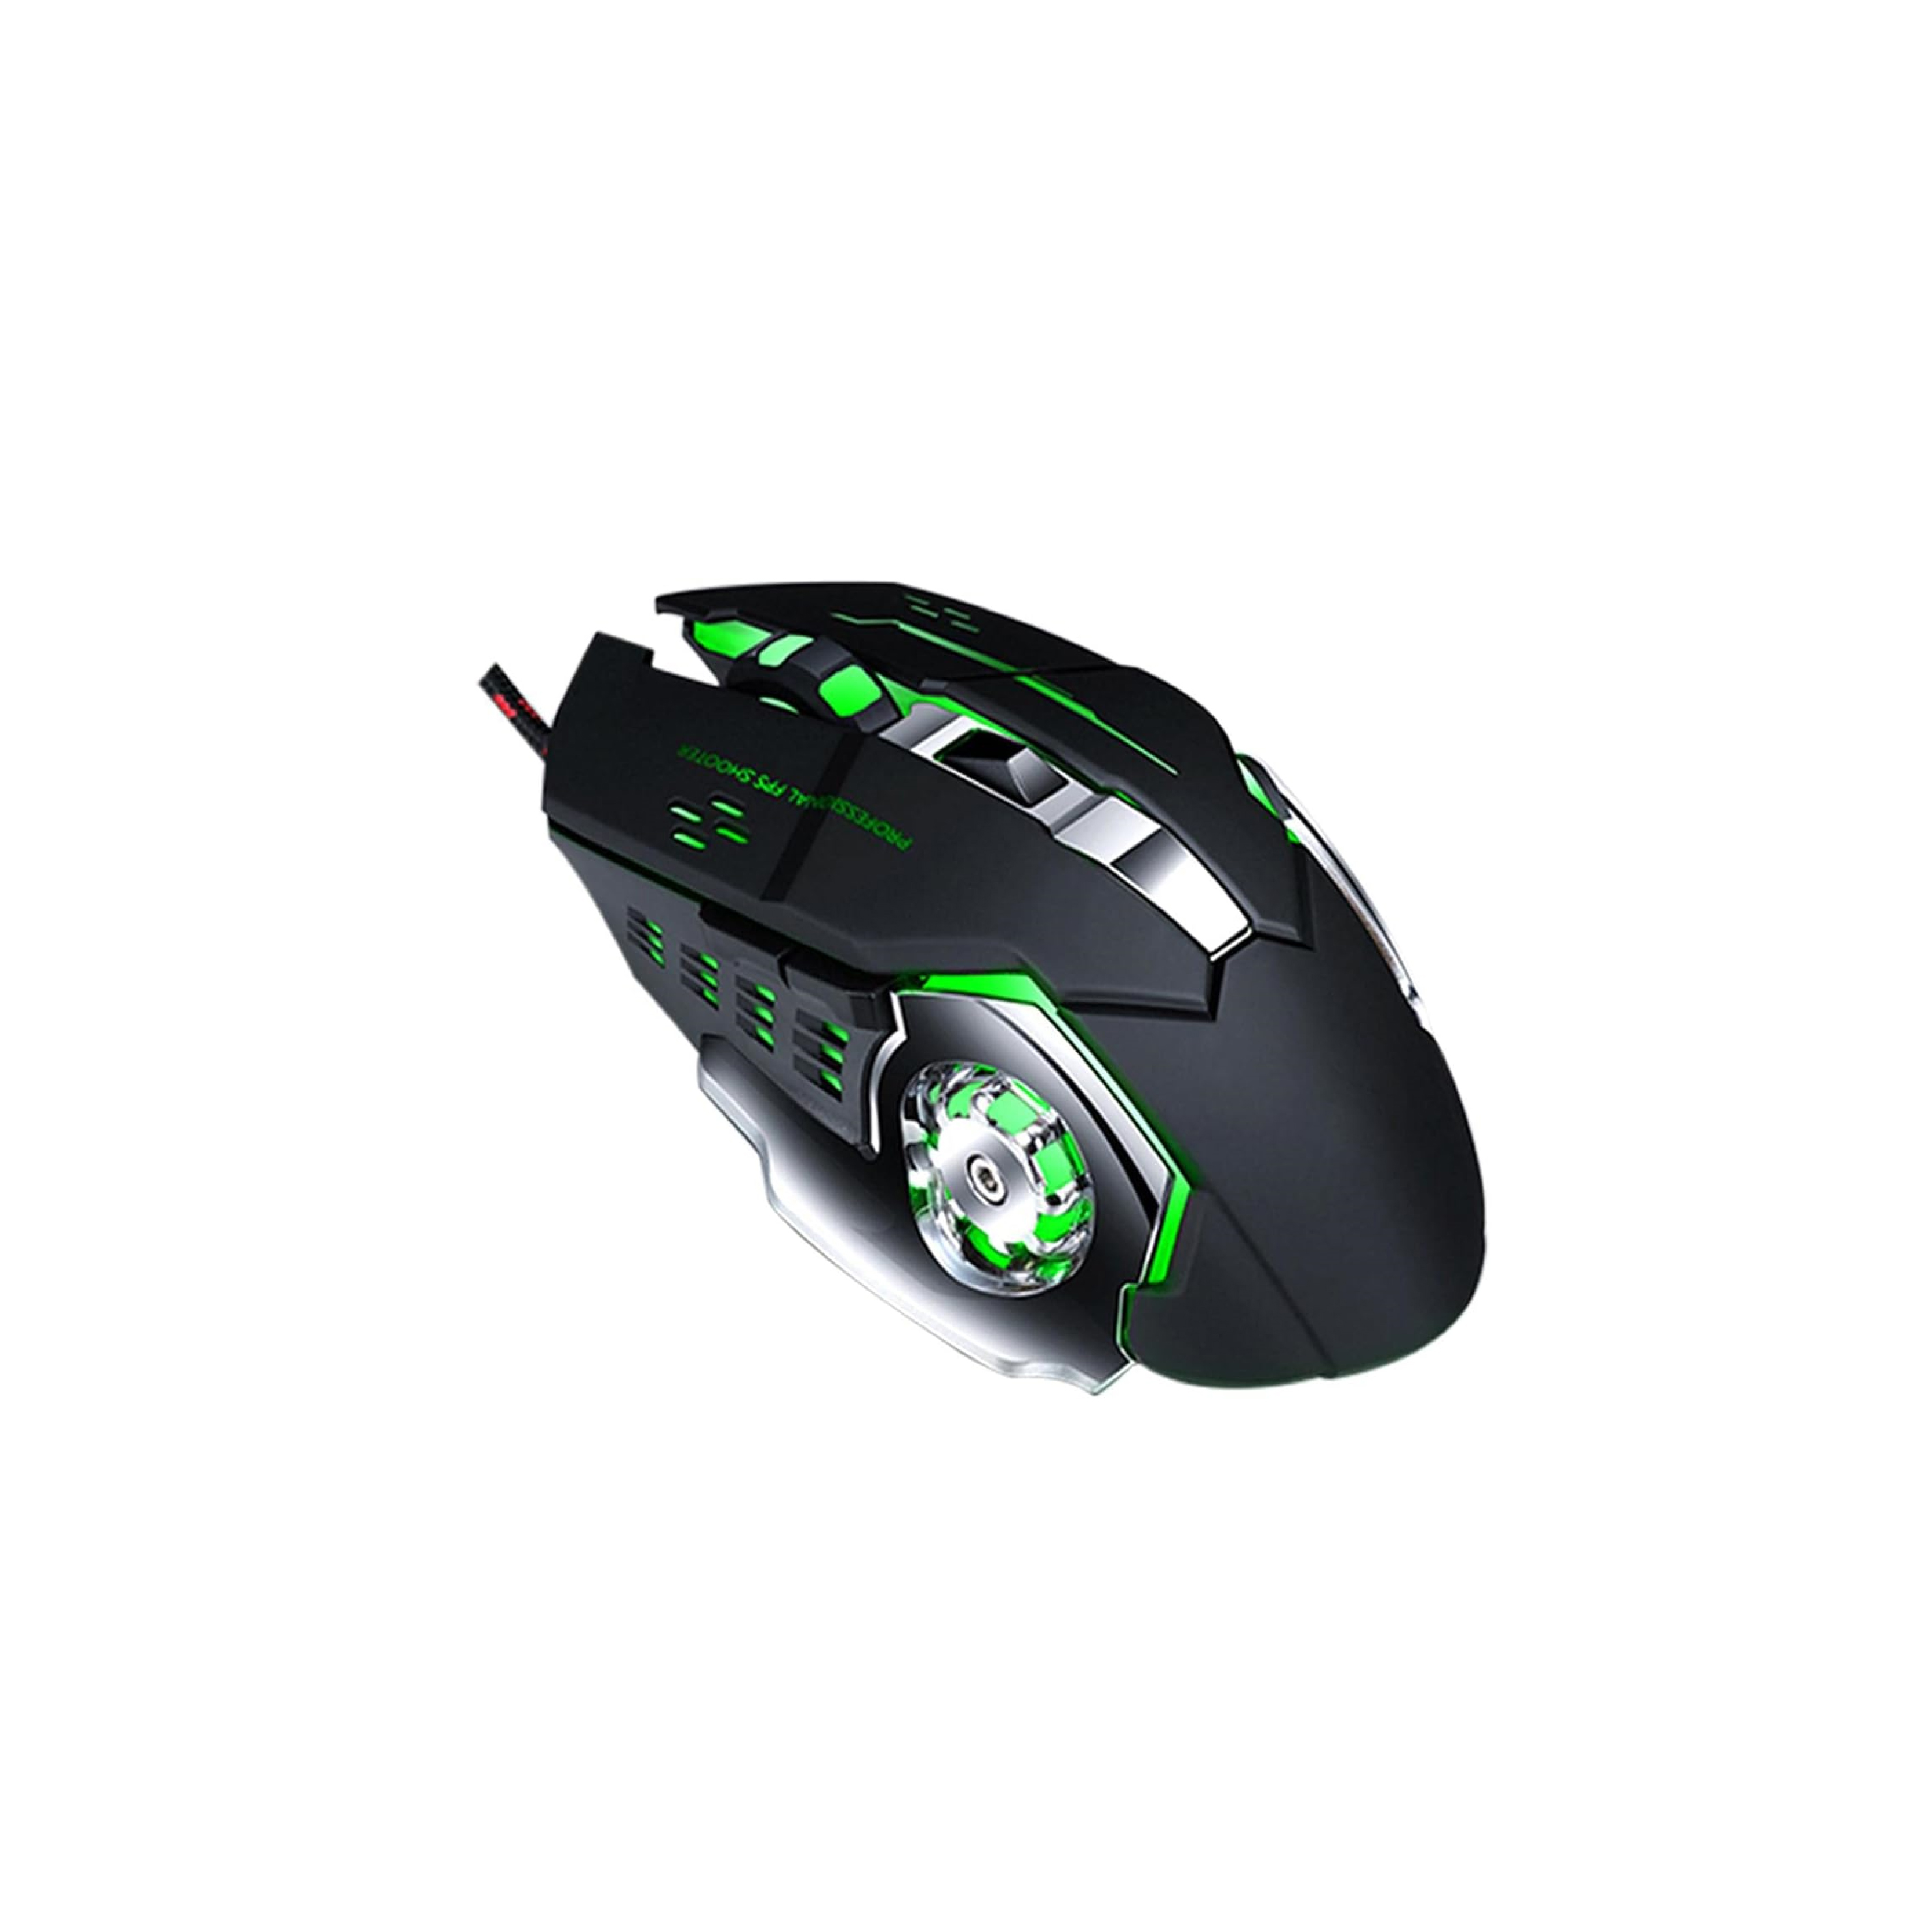 GAMING MOUSE MS12 PATOO 5 BUTTONS USB, Mouse